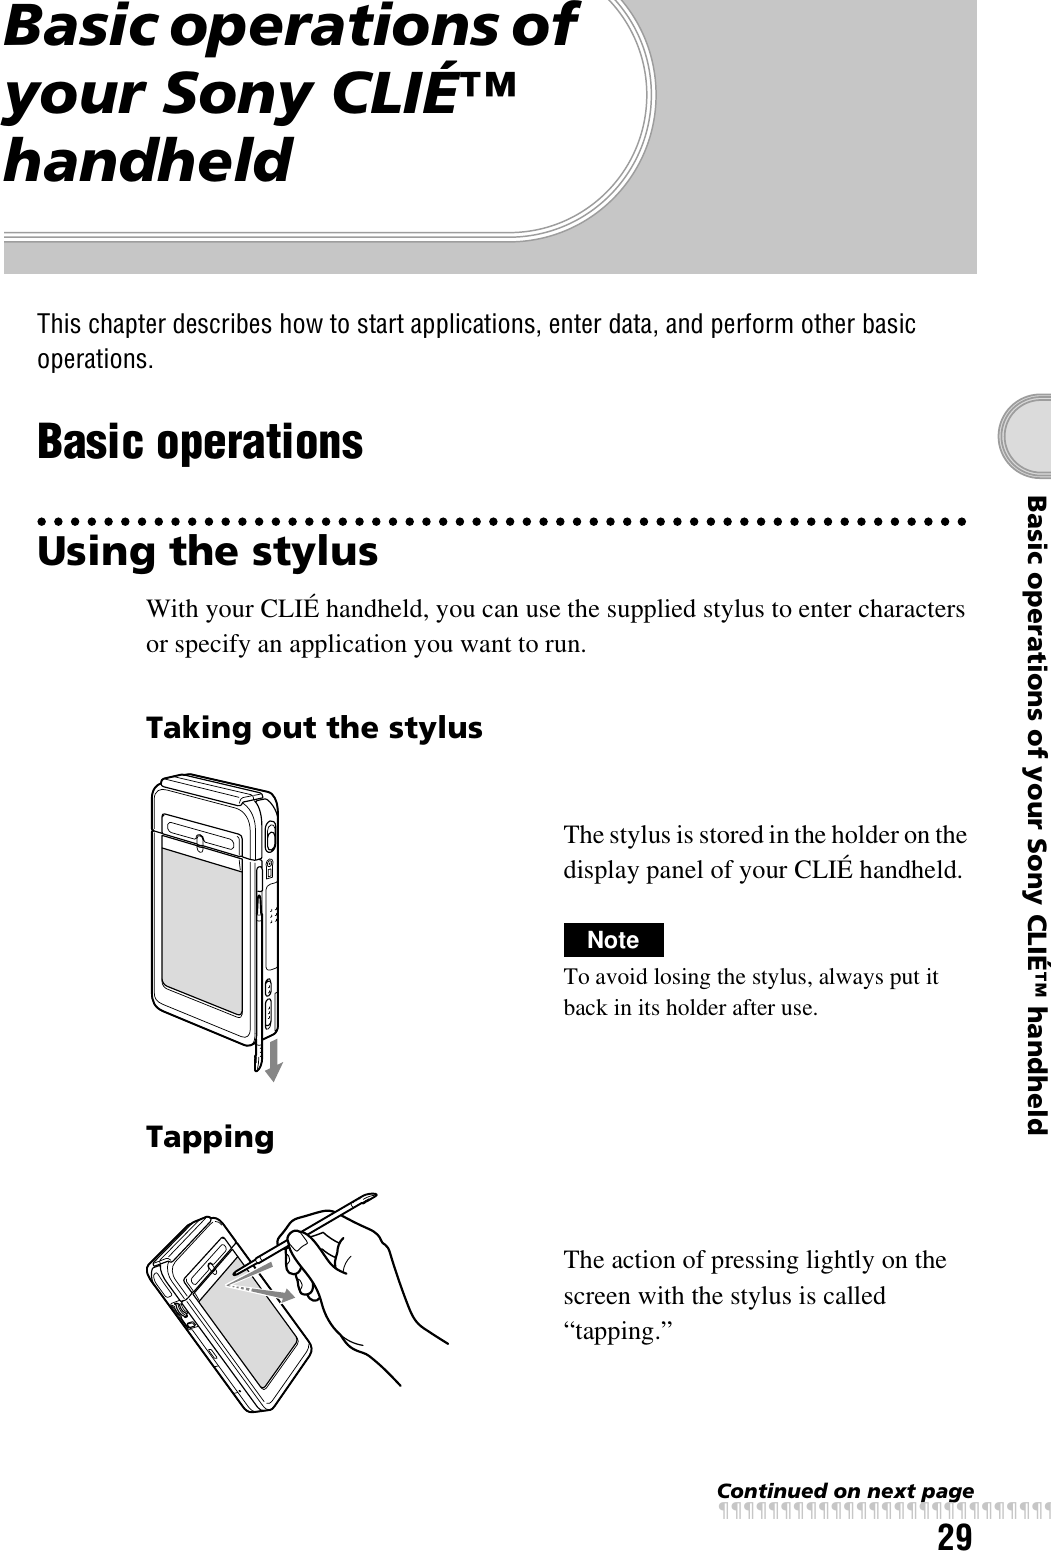 29Basic operations of your Sony CLIÉ™ handheldBasic operations of your Sony CLIÉ™ handheldThis chapter describes how to start applications, enter data, and perform other basic operations.Basic operationsUsing the stylusWith your CLIÉ handheld, you can use the supplied stylus to enter characters or specify an application you want to run.Taking out the stylusThe stylus is stored in the holder on the display panel of your CLIÉ handheld.NoteTo avoid losing the stylus, always put it back in its holder after use.TappingThe action of pressing lightly on the screen with the stylus is called “tapping.”Continued on next pagexxxxxxxxxxxxxxxxxxxxxxxxxxx